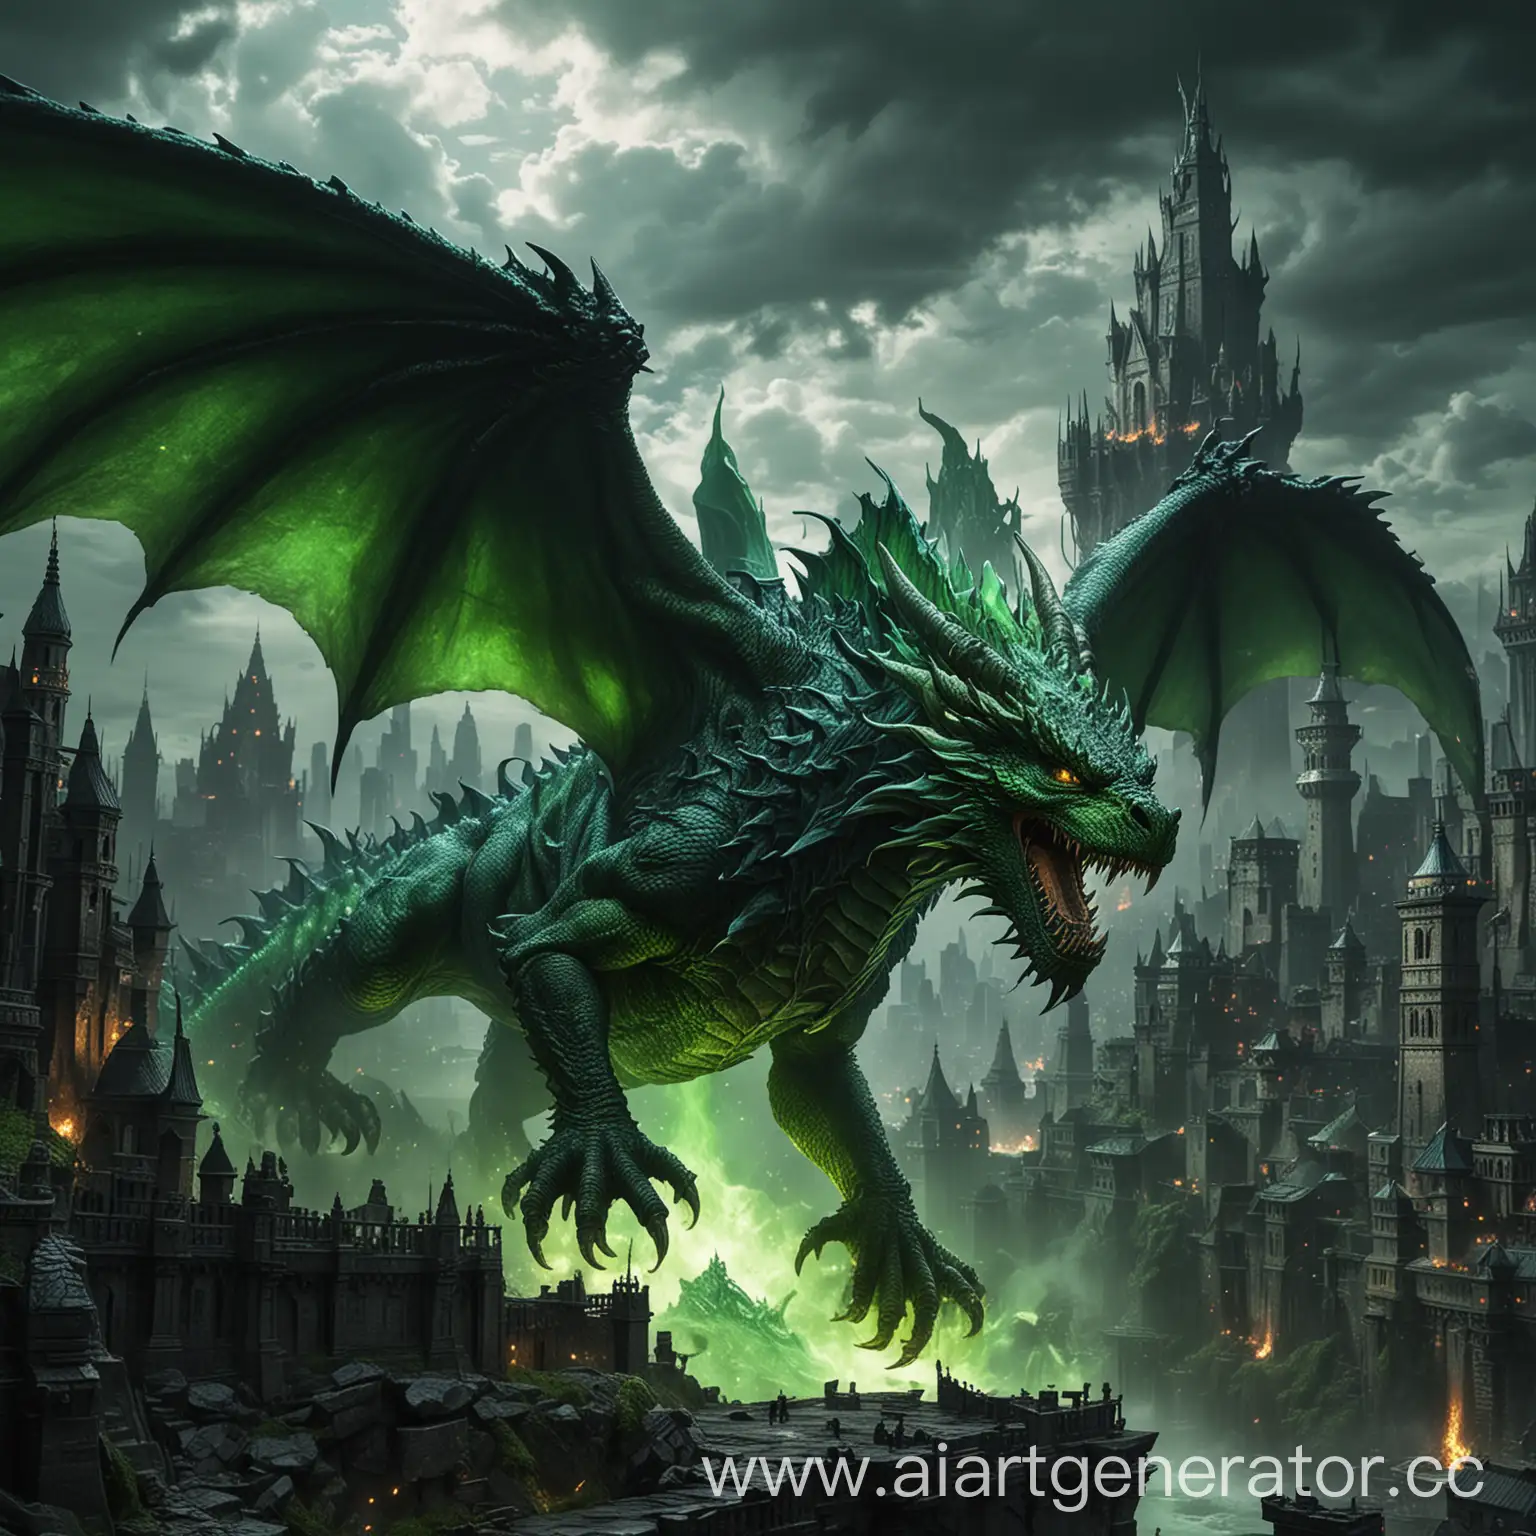 Majestic-Toxic-Dragon-Over-City-Acid-Streams-and-City-Guards-Fleeing